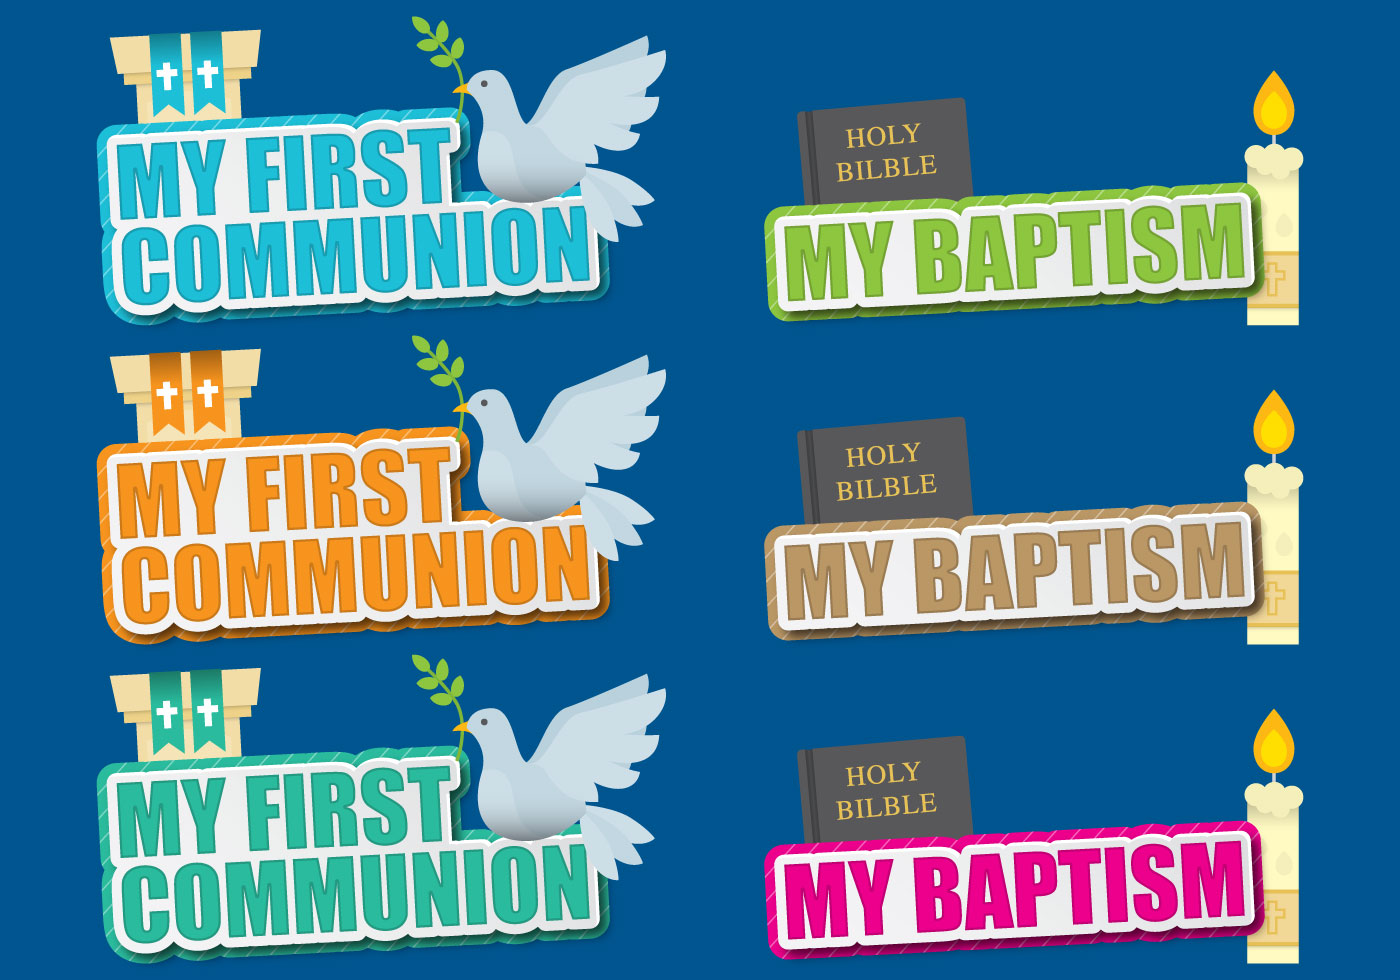 Download Communion And Baptism Titles - Download Free Vectors ...